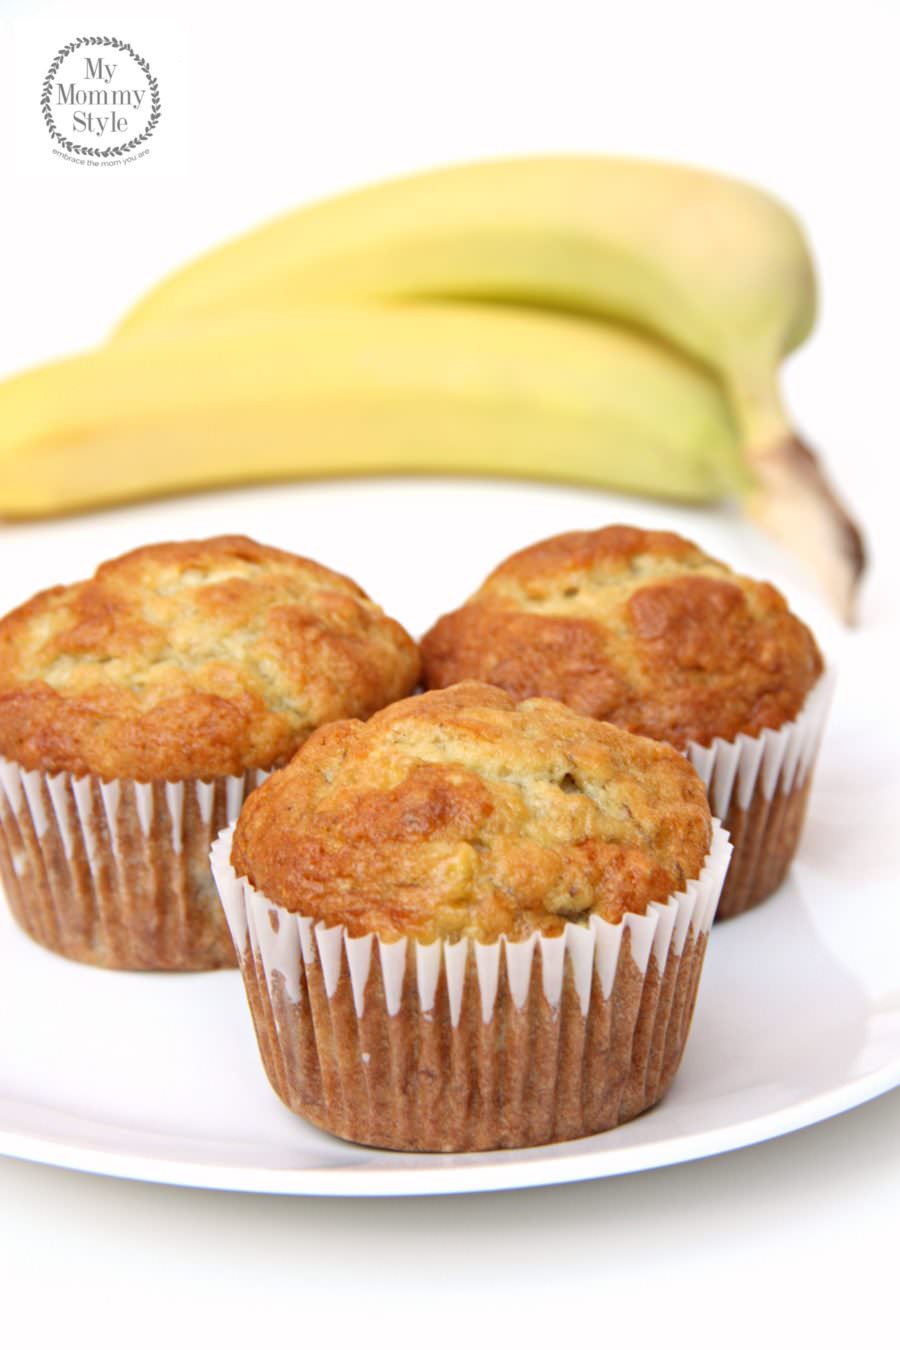 Perfect Banana Muffins {with video} - My Mommy Style